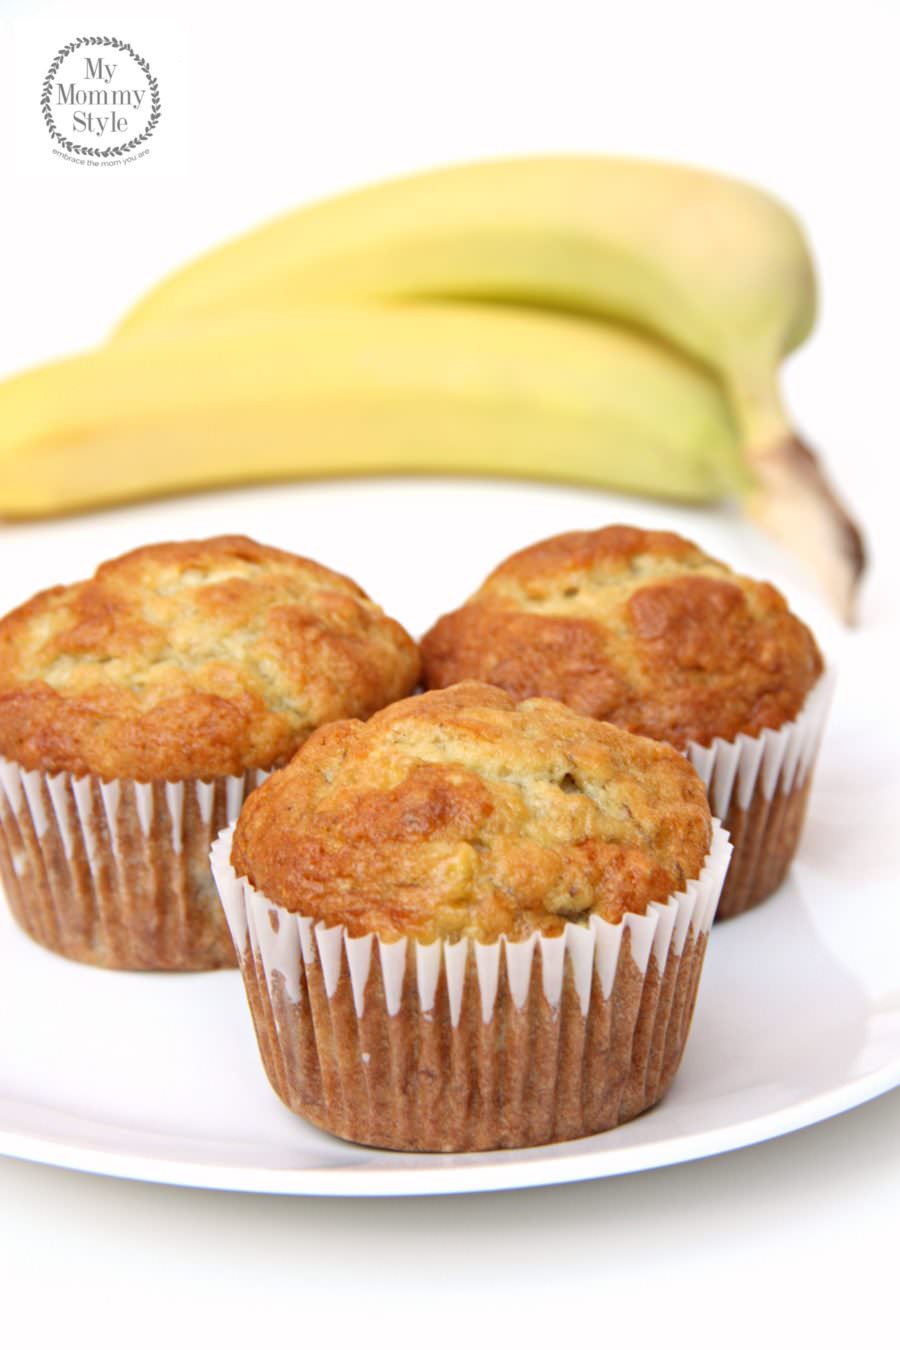 Perfect Banana Muffins {with video} - My Mommy Style